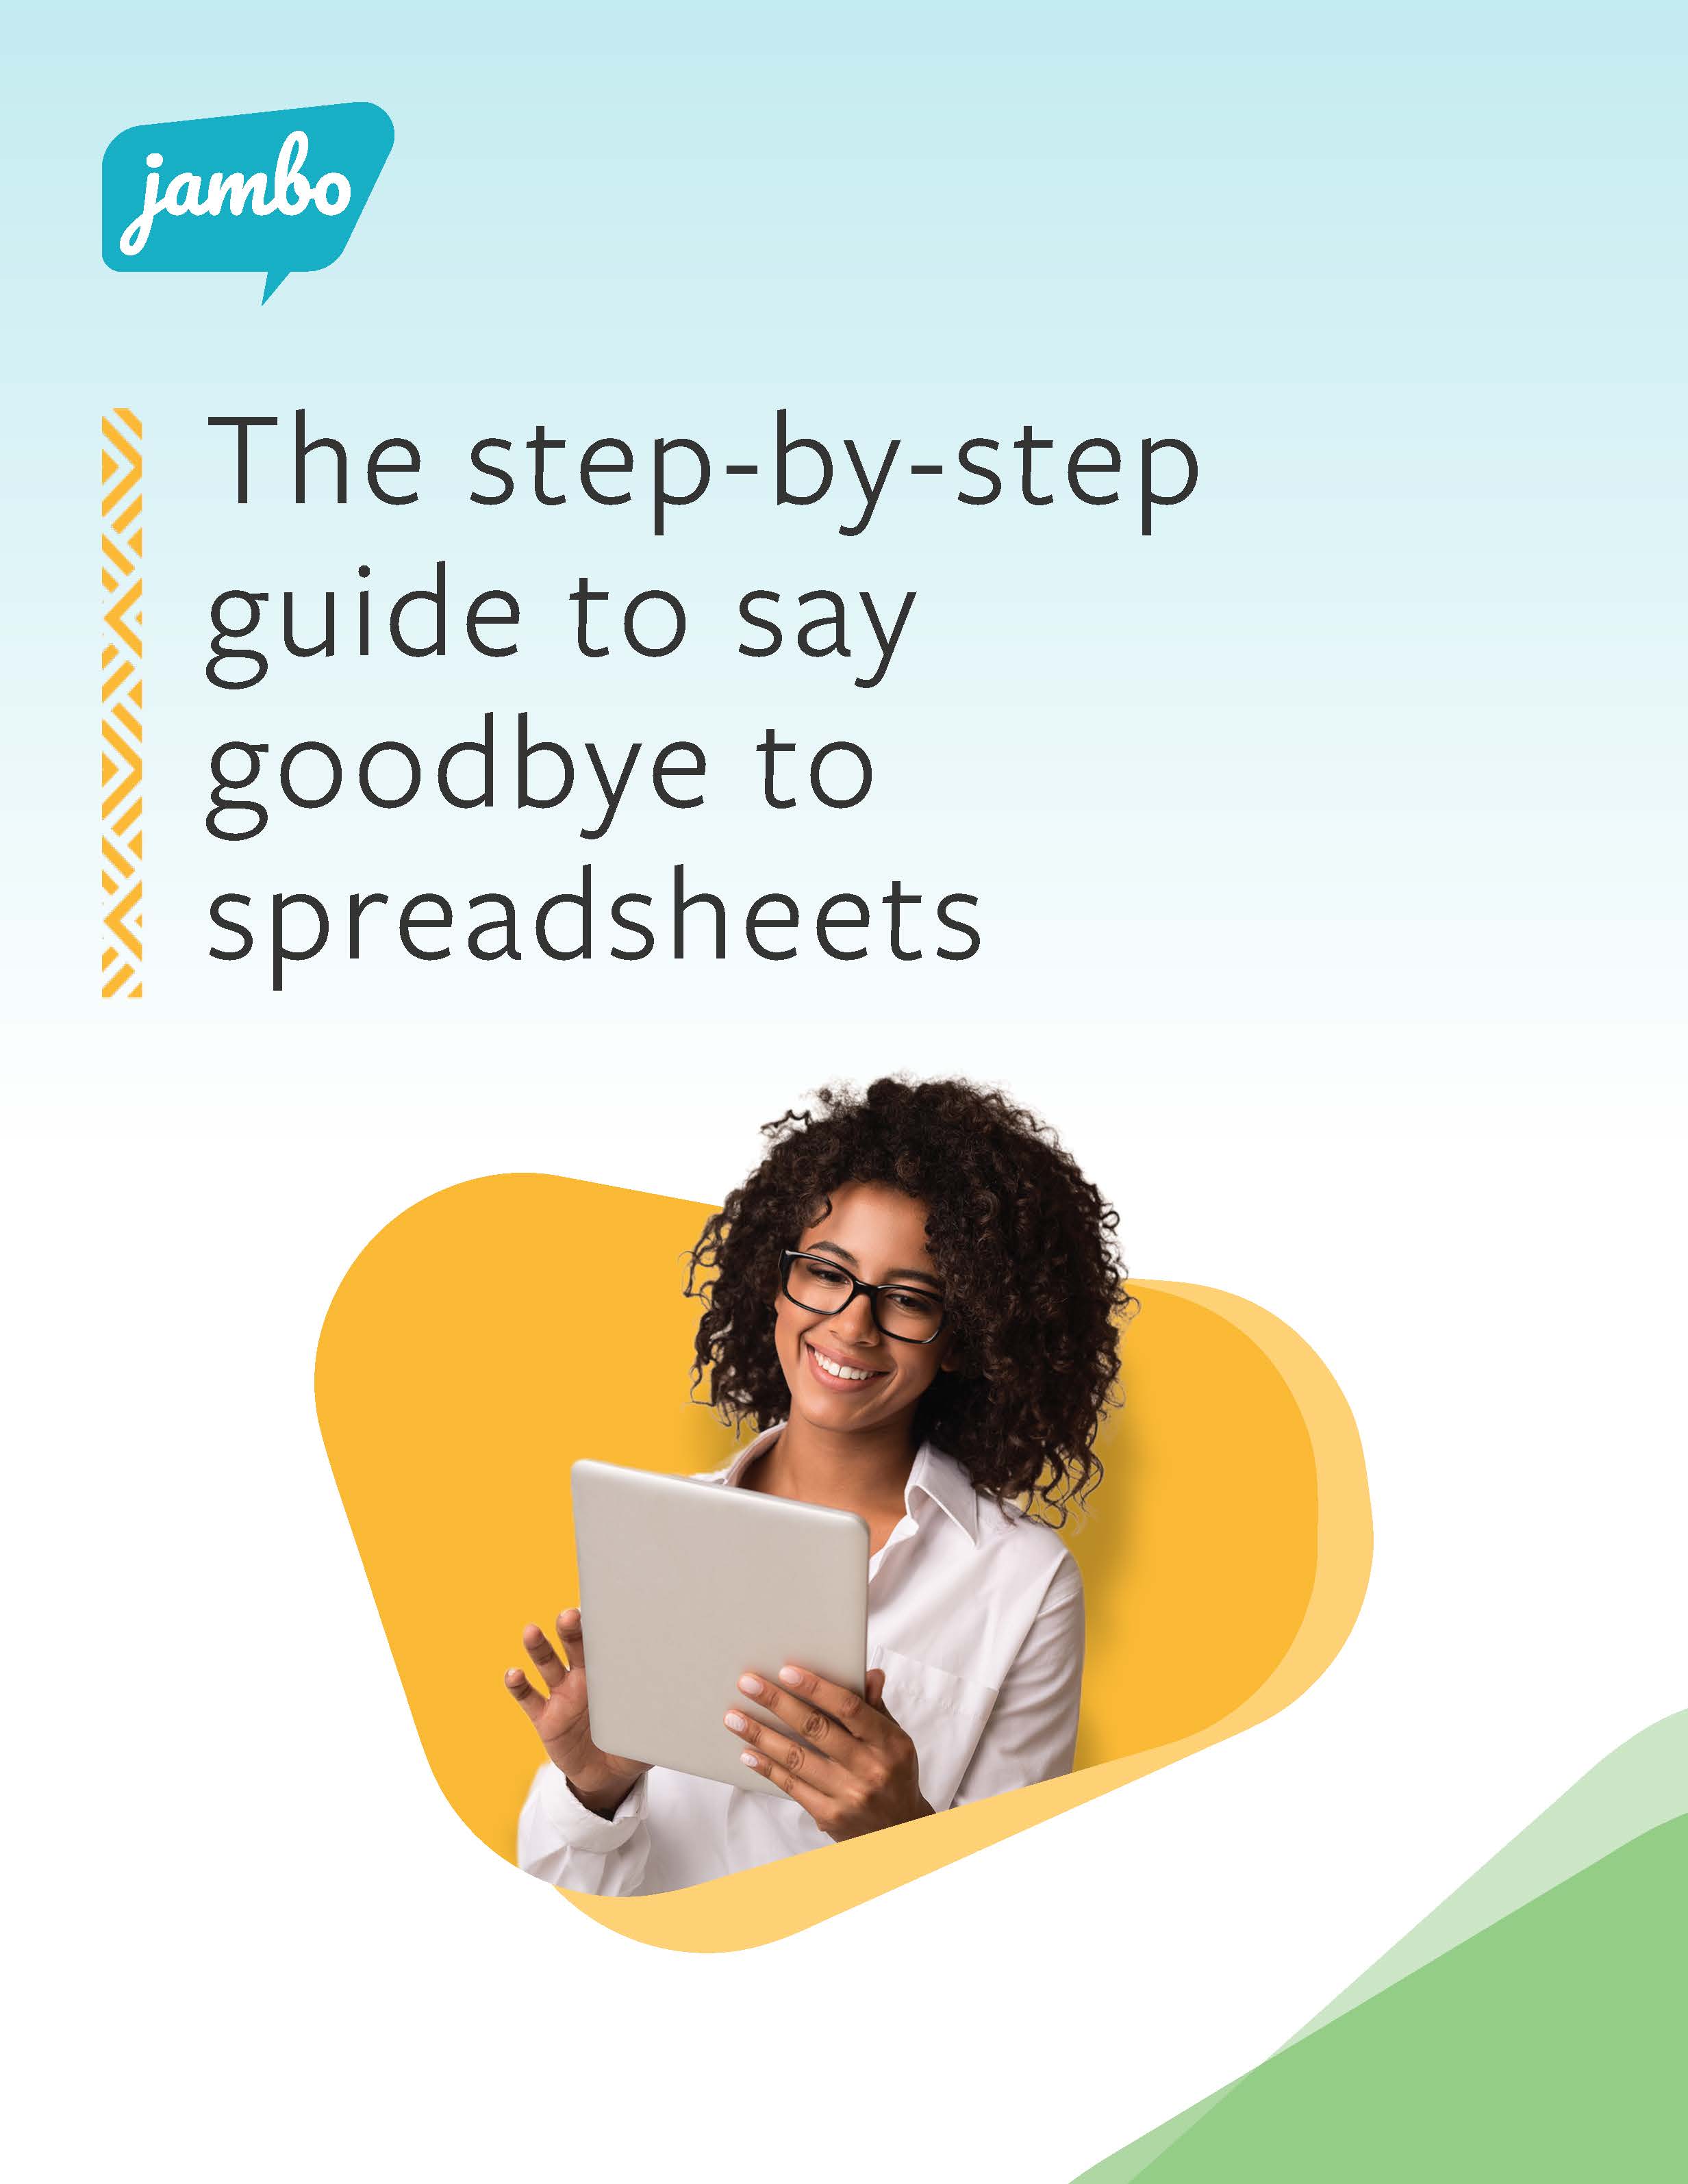 The step-by-step guide to say goodbye to spreadsheets